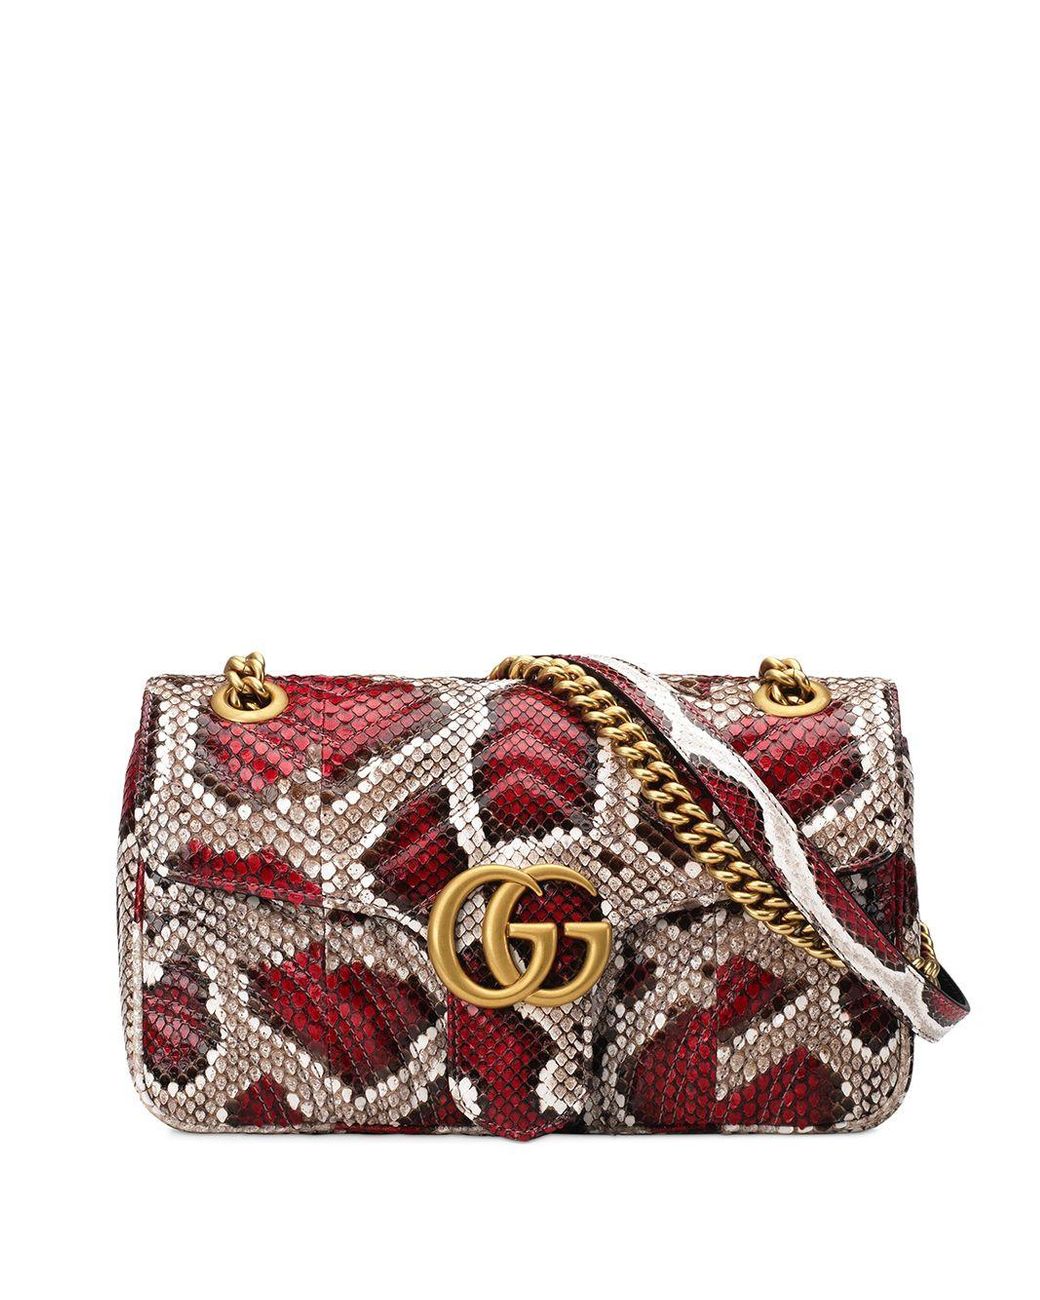 GG Marmont Small Shearling Shoulder Bag in Pink - Gucci